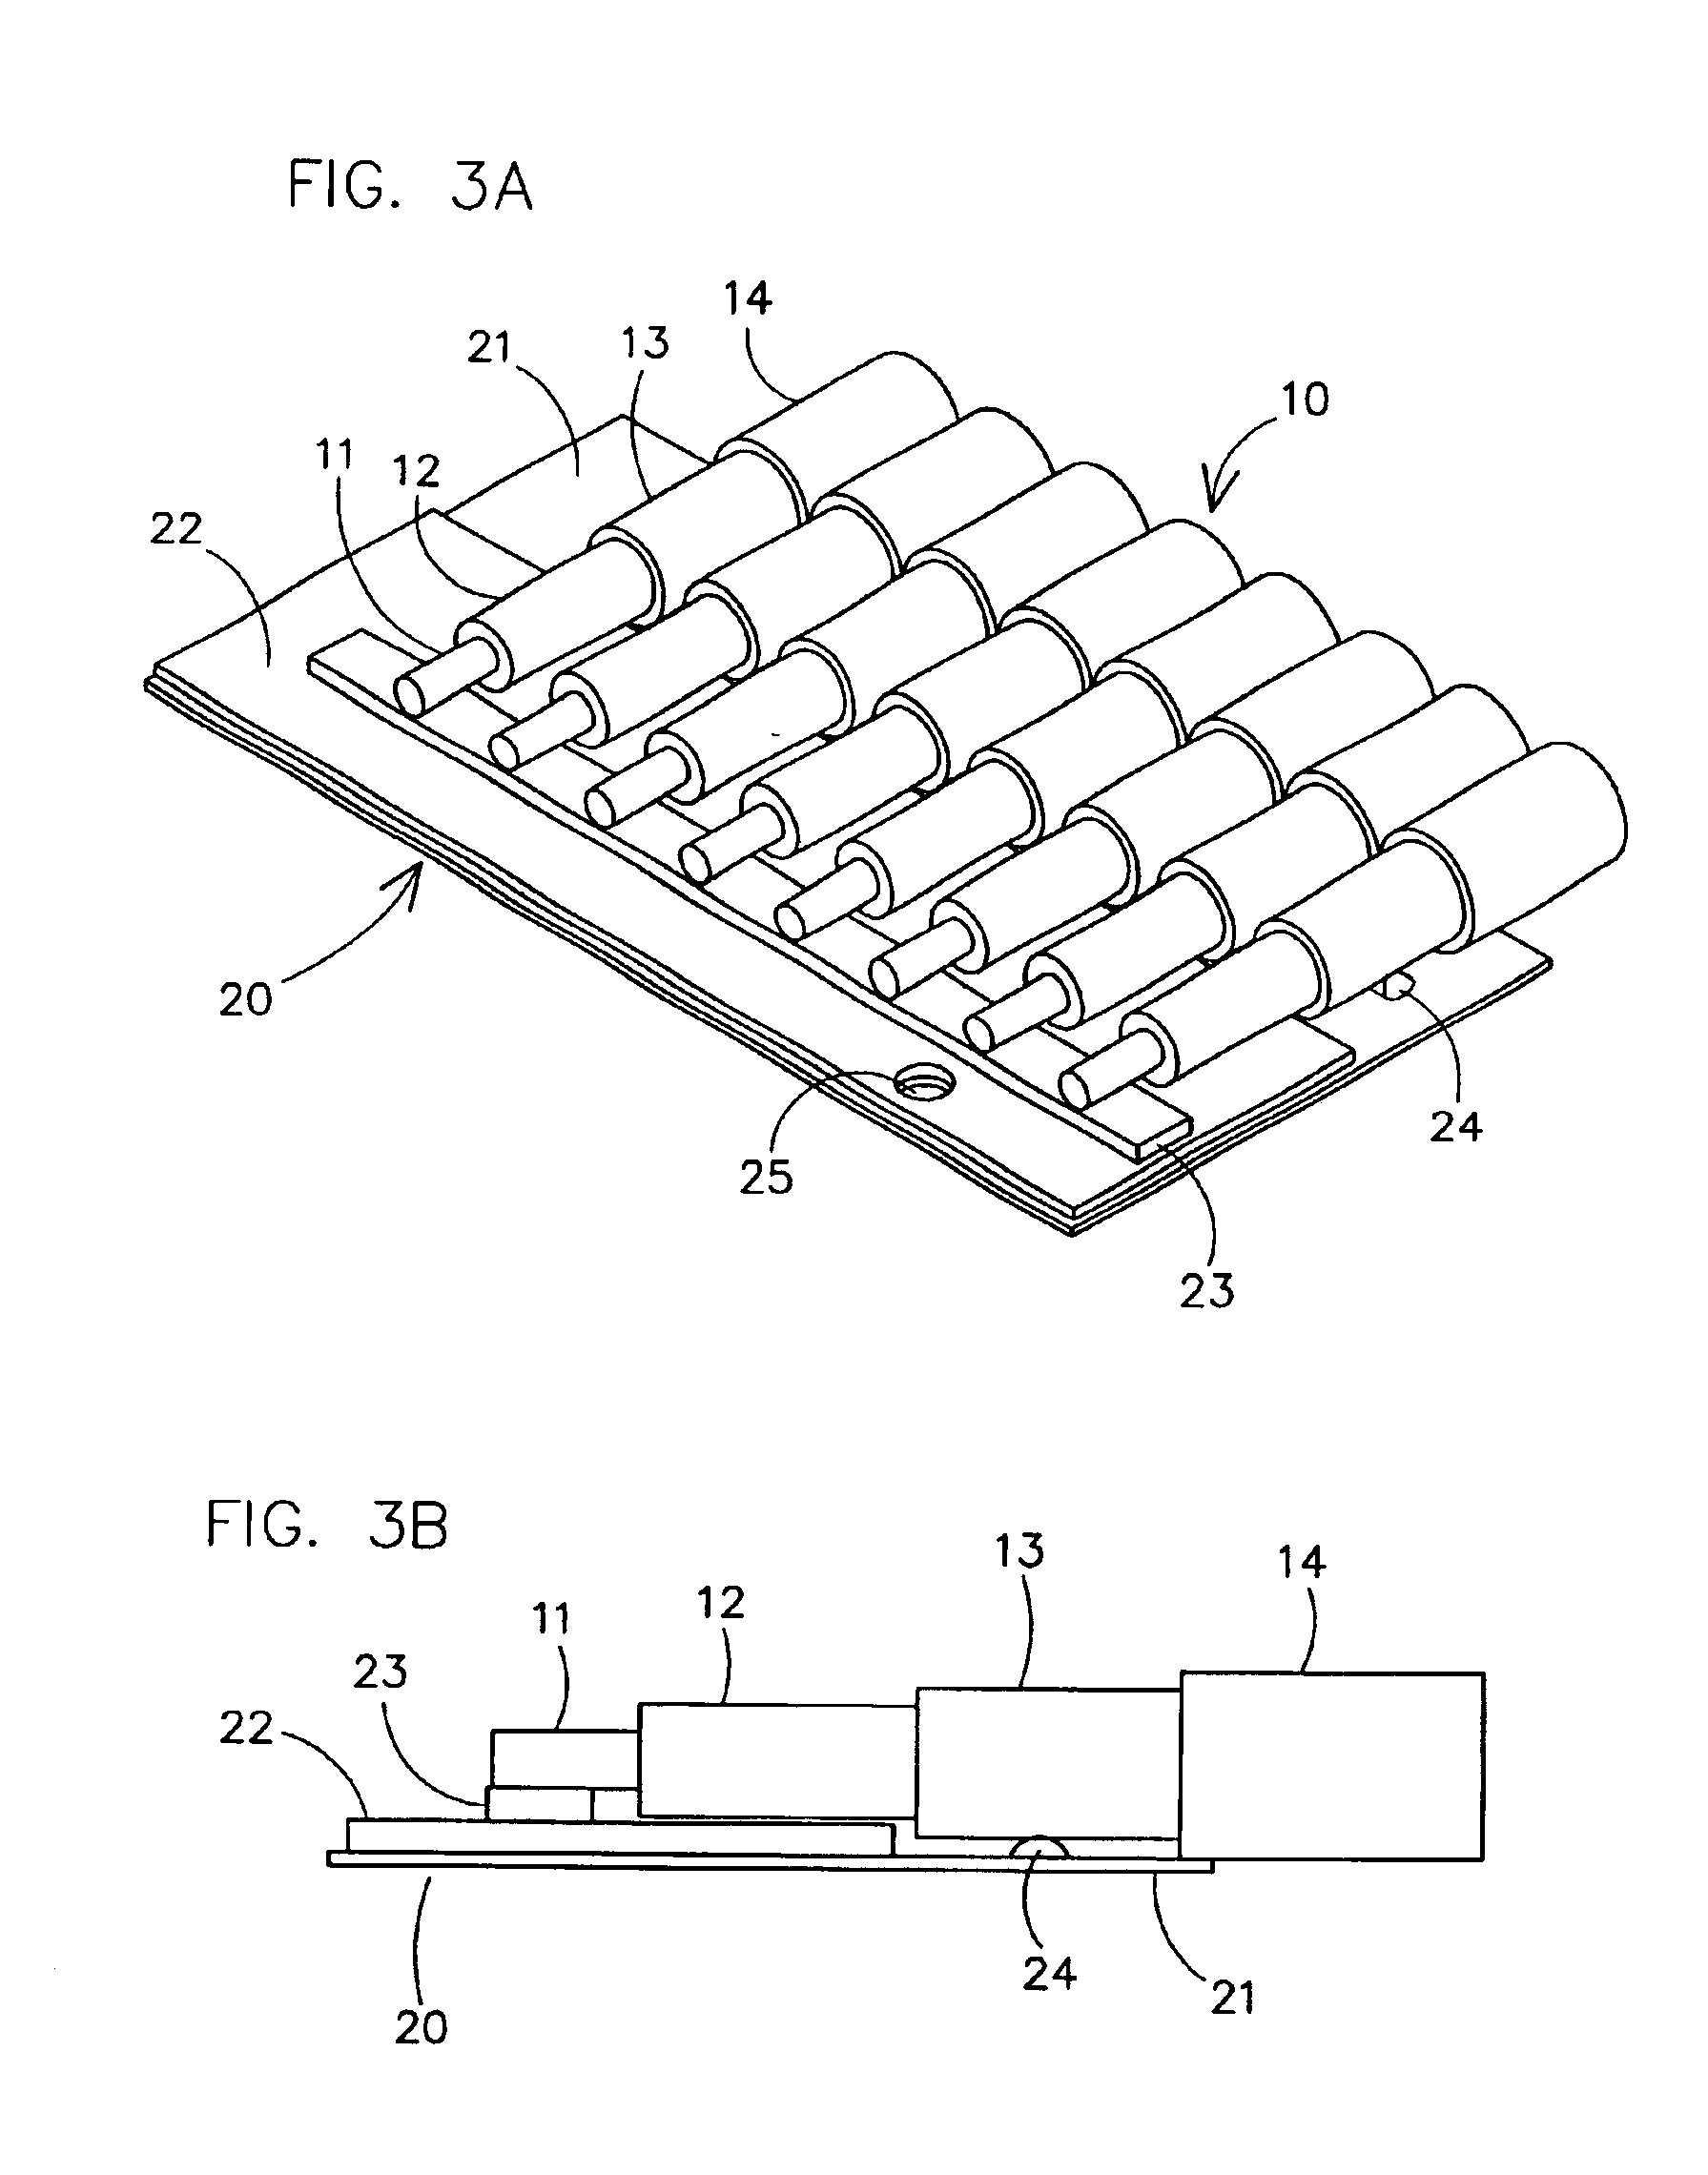 Method for connecting coaxial cables to a printed circuit board